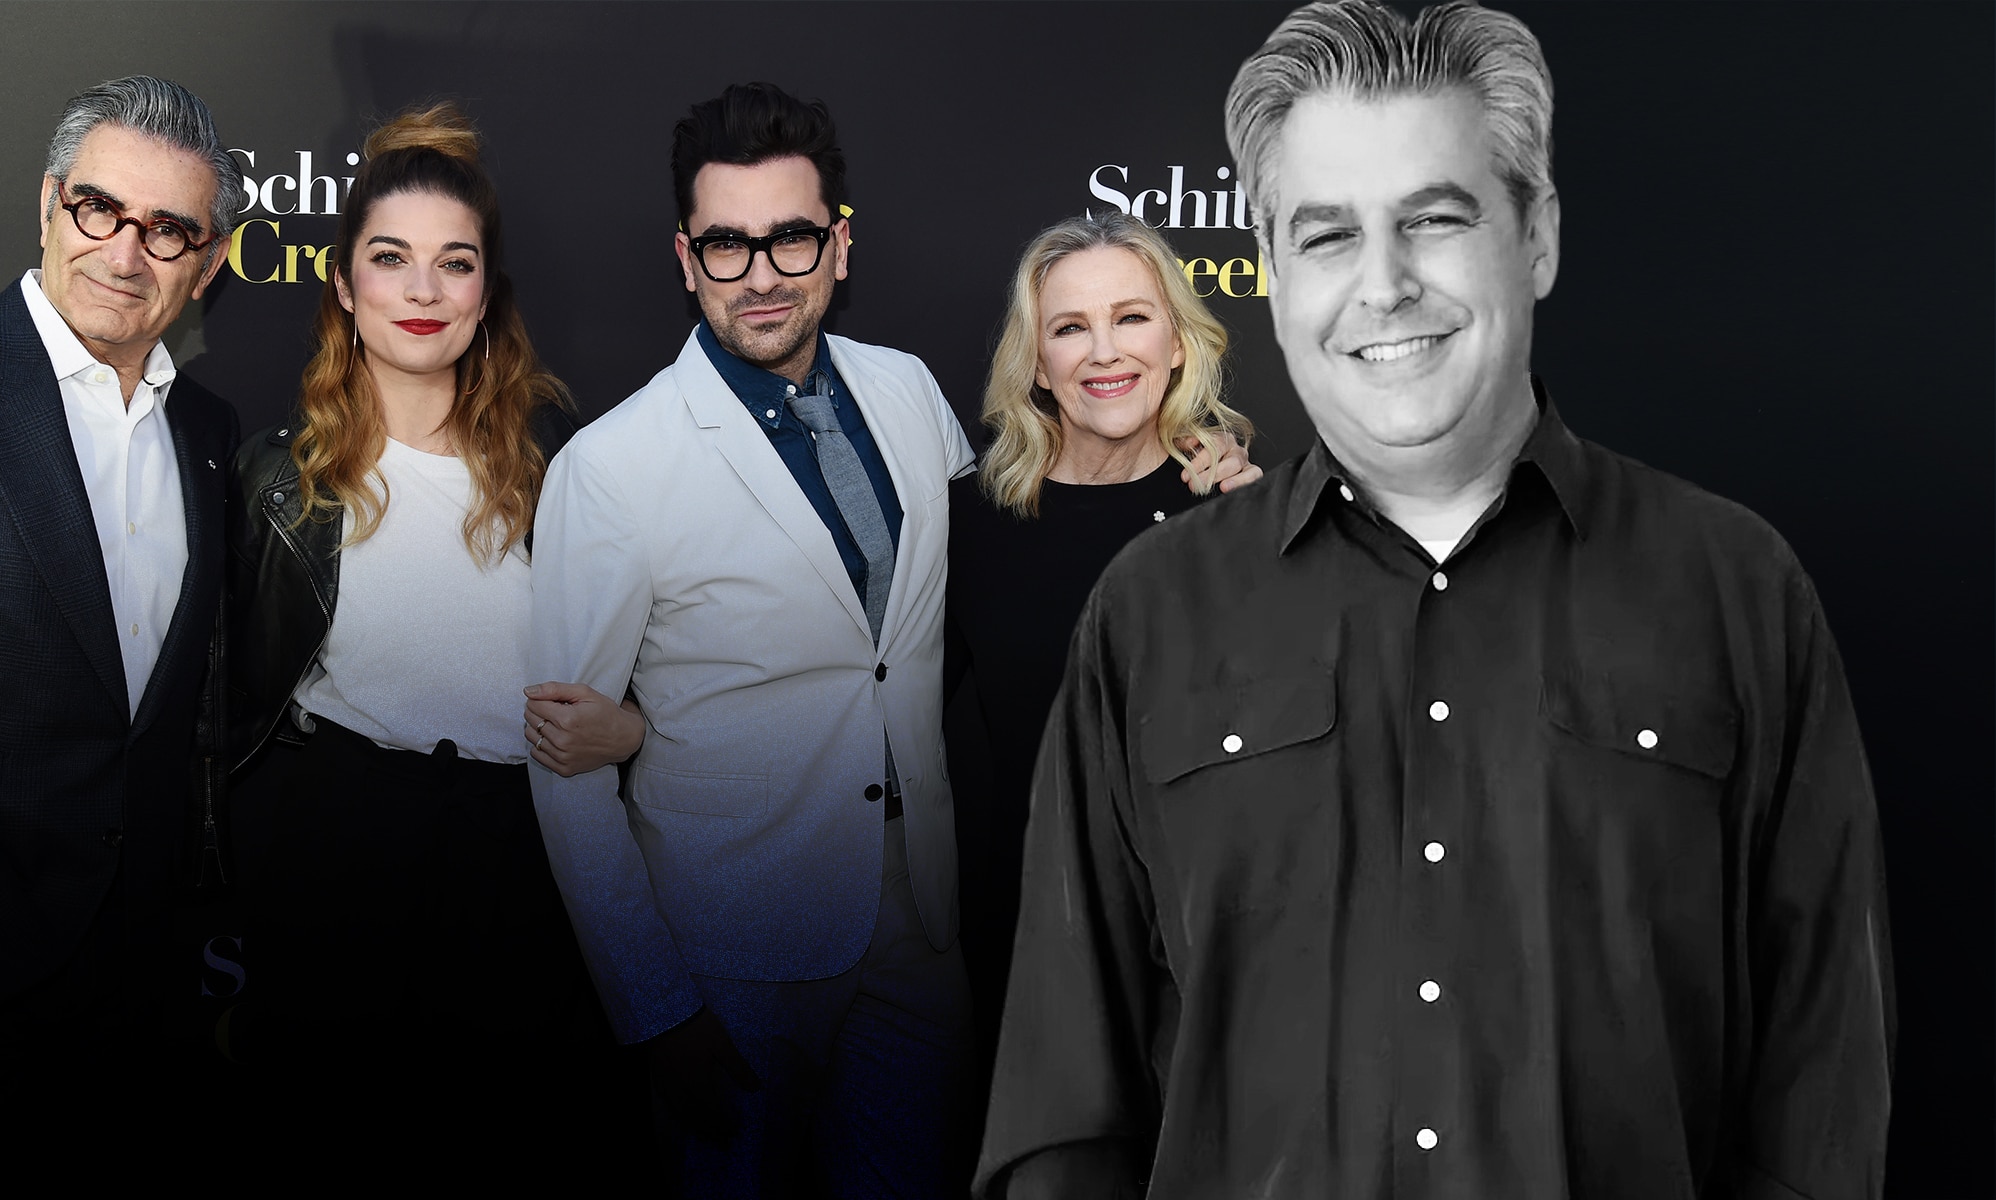 Levy pays tribute to Schitt's Creek producer Feigin